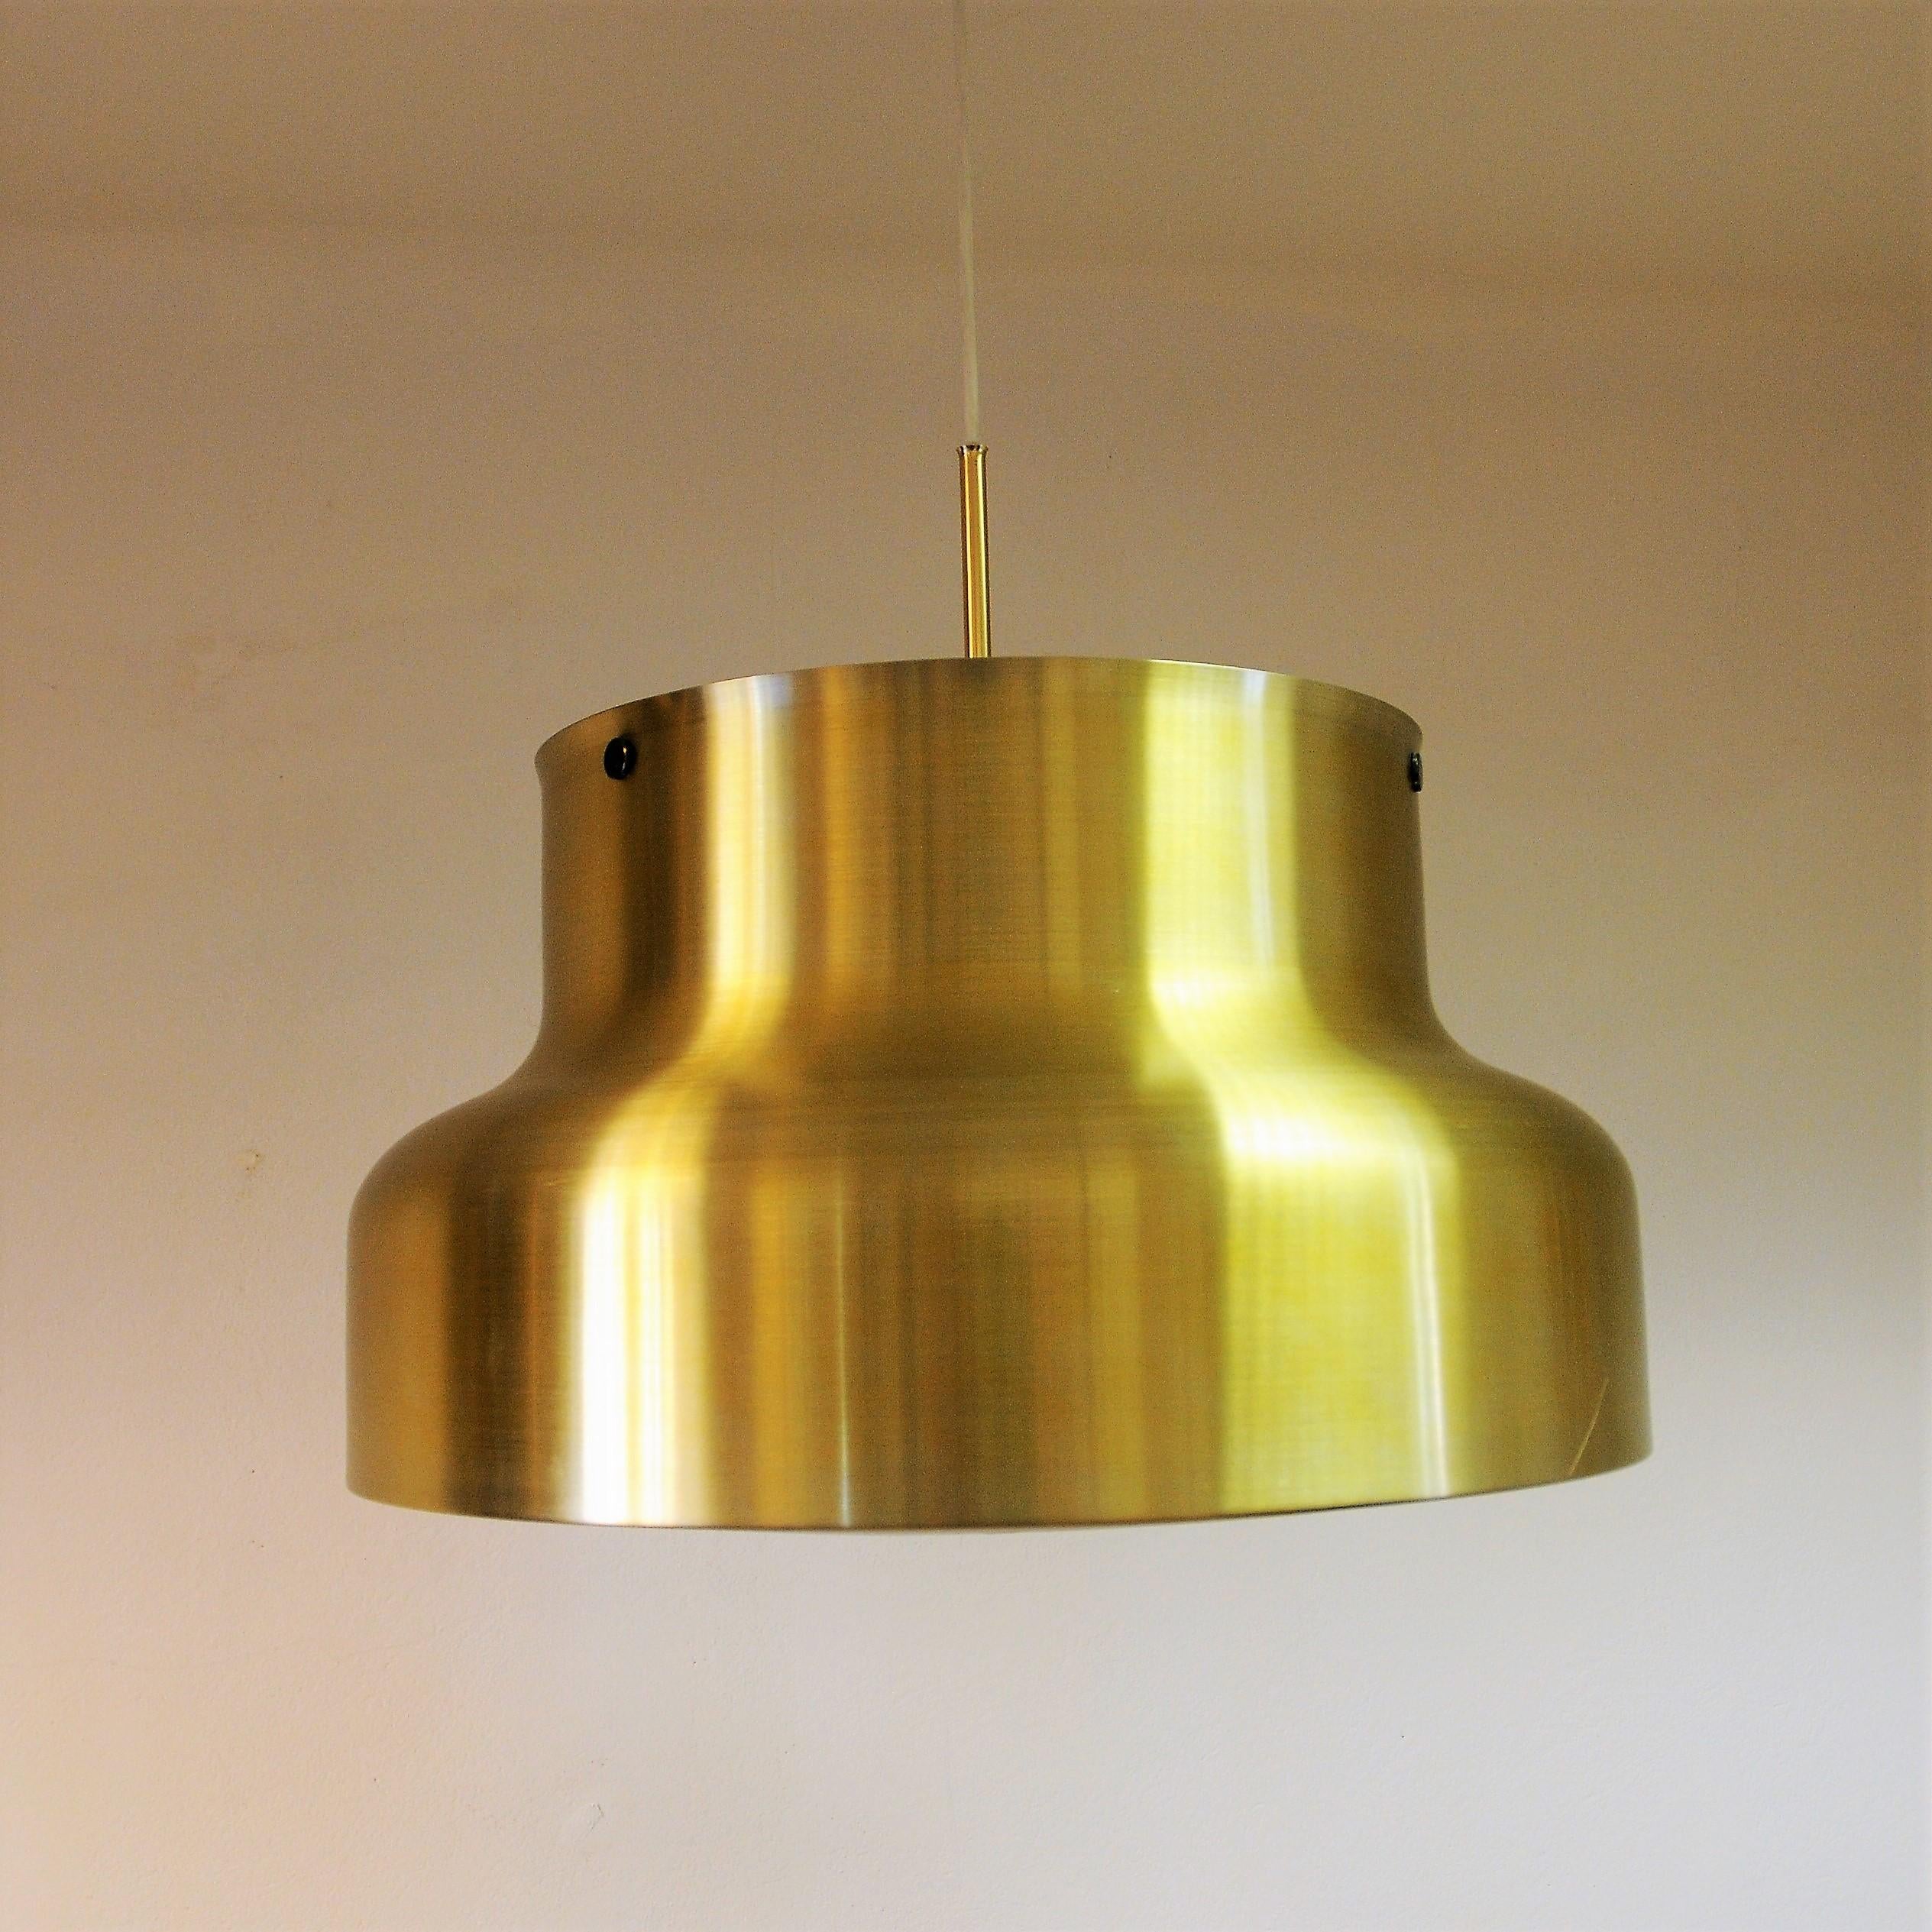 Big and beautiful Ceiling lamp ”Bumlingen” in polished brass by Anders Pehrson for Atelje Lyktan, 1960s Sweden. This is the larges Bumlingen made by Pehrson and it was produced untill the 1970s. White plastic grid inside and whitepainted metal.